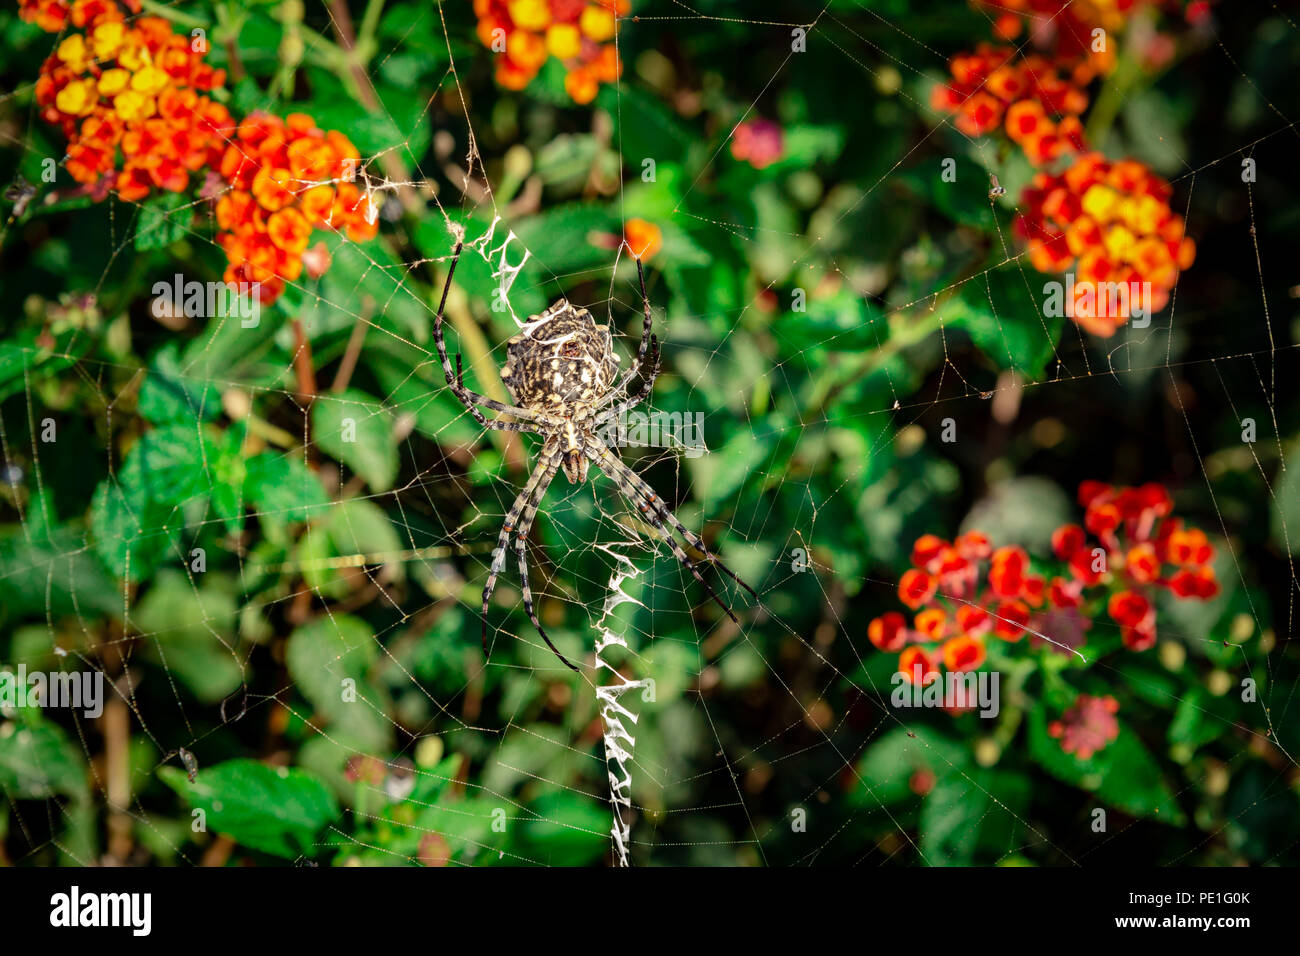 Female Lobed Agiope spider waiting on her web with stabilimentum clearly visible Stock Photo